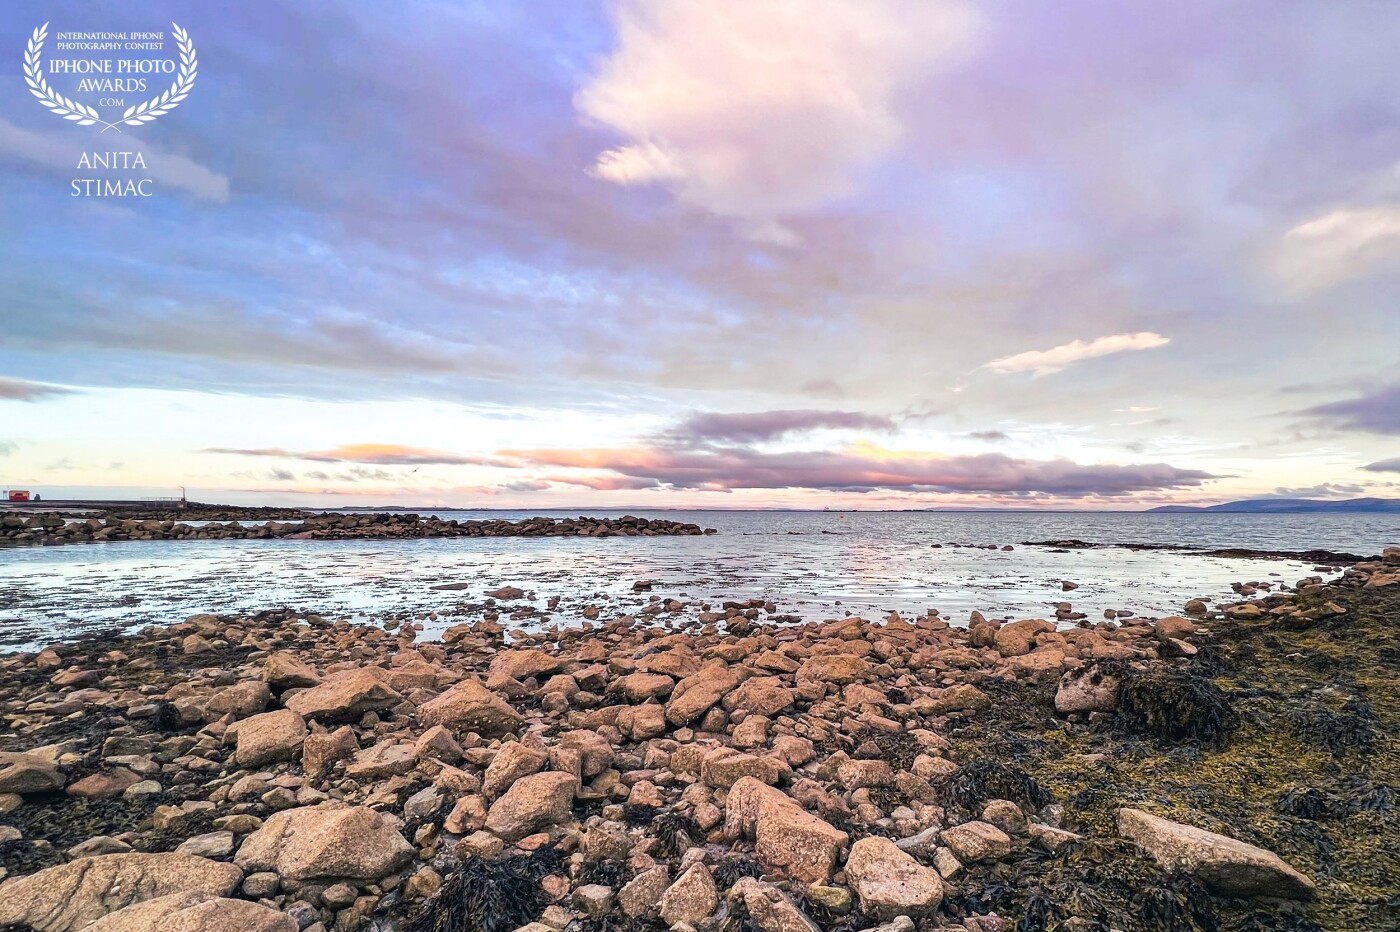 “Well, the Ocean hides many secrets, and all of them are precious and beautiful.”<br />
<br />
Sunset over Galway Bay. Salthill Promenade, Ireland